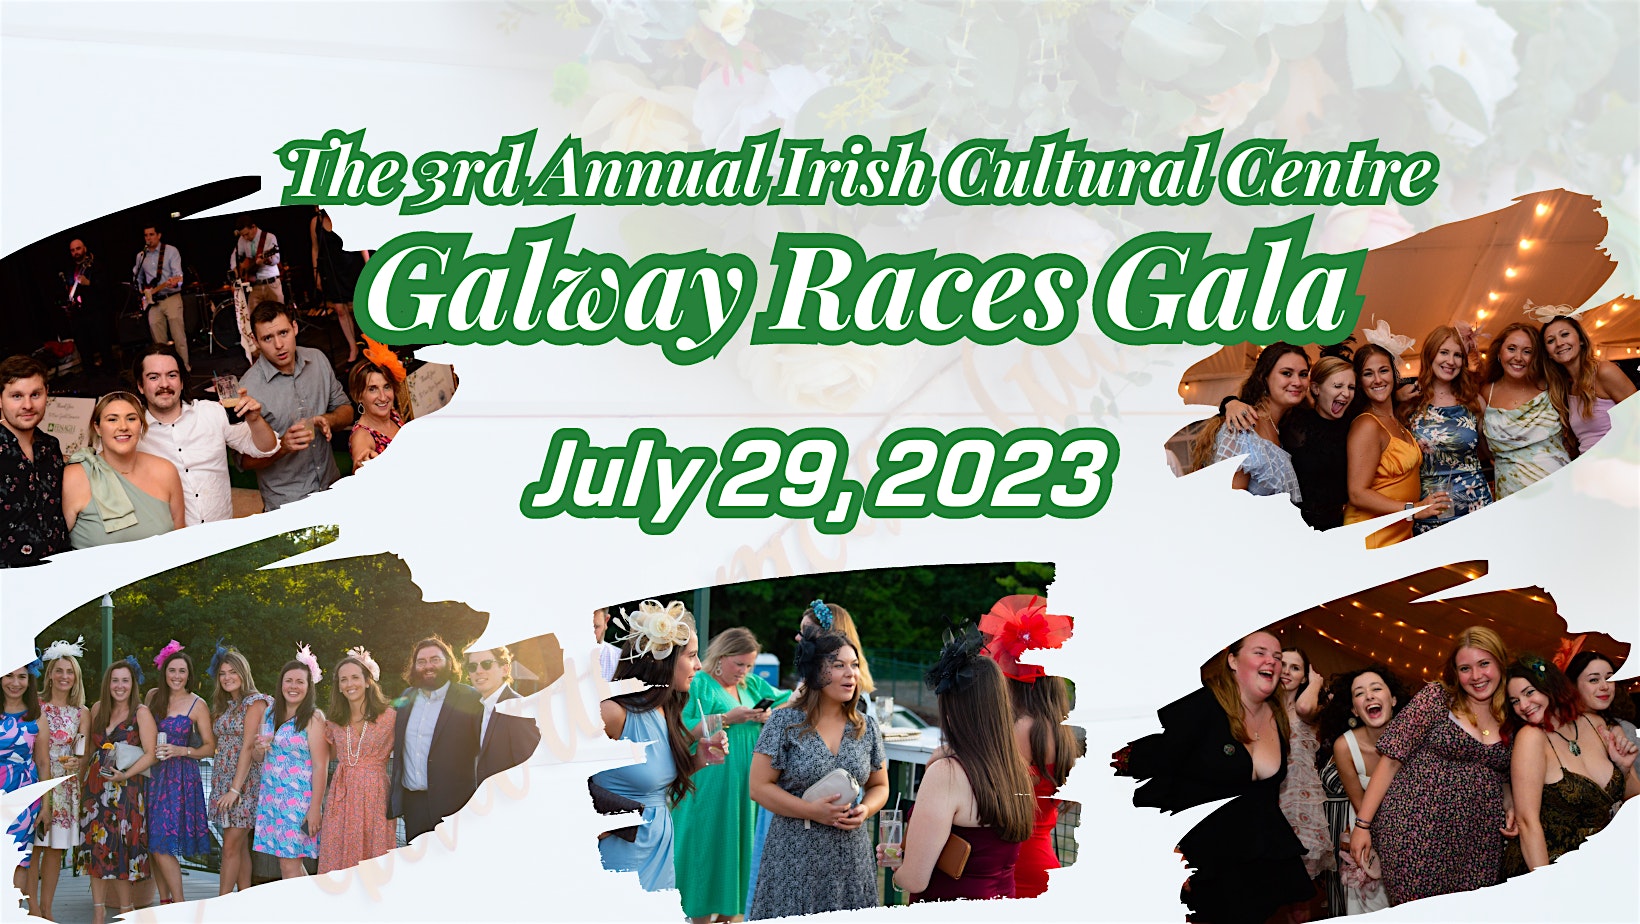 The 3rd Annual Galway Races Gala